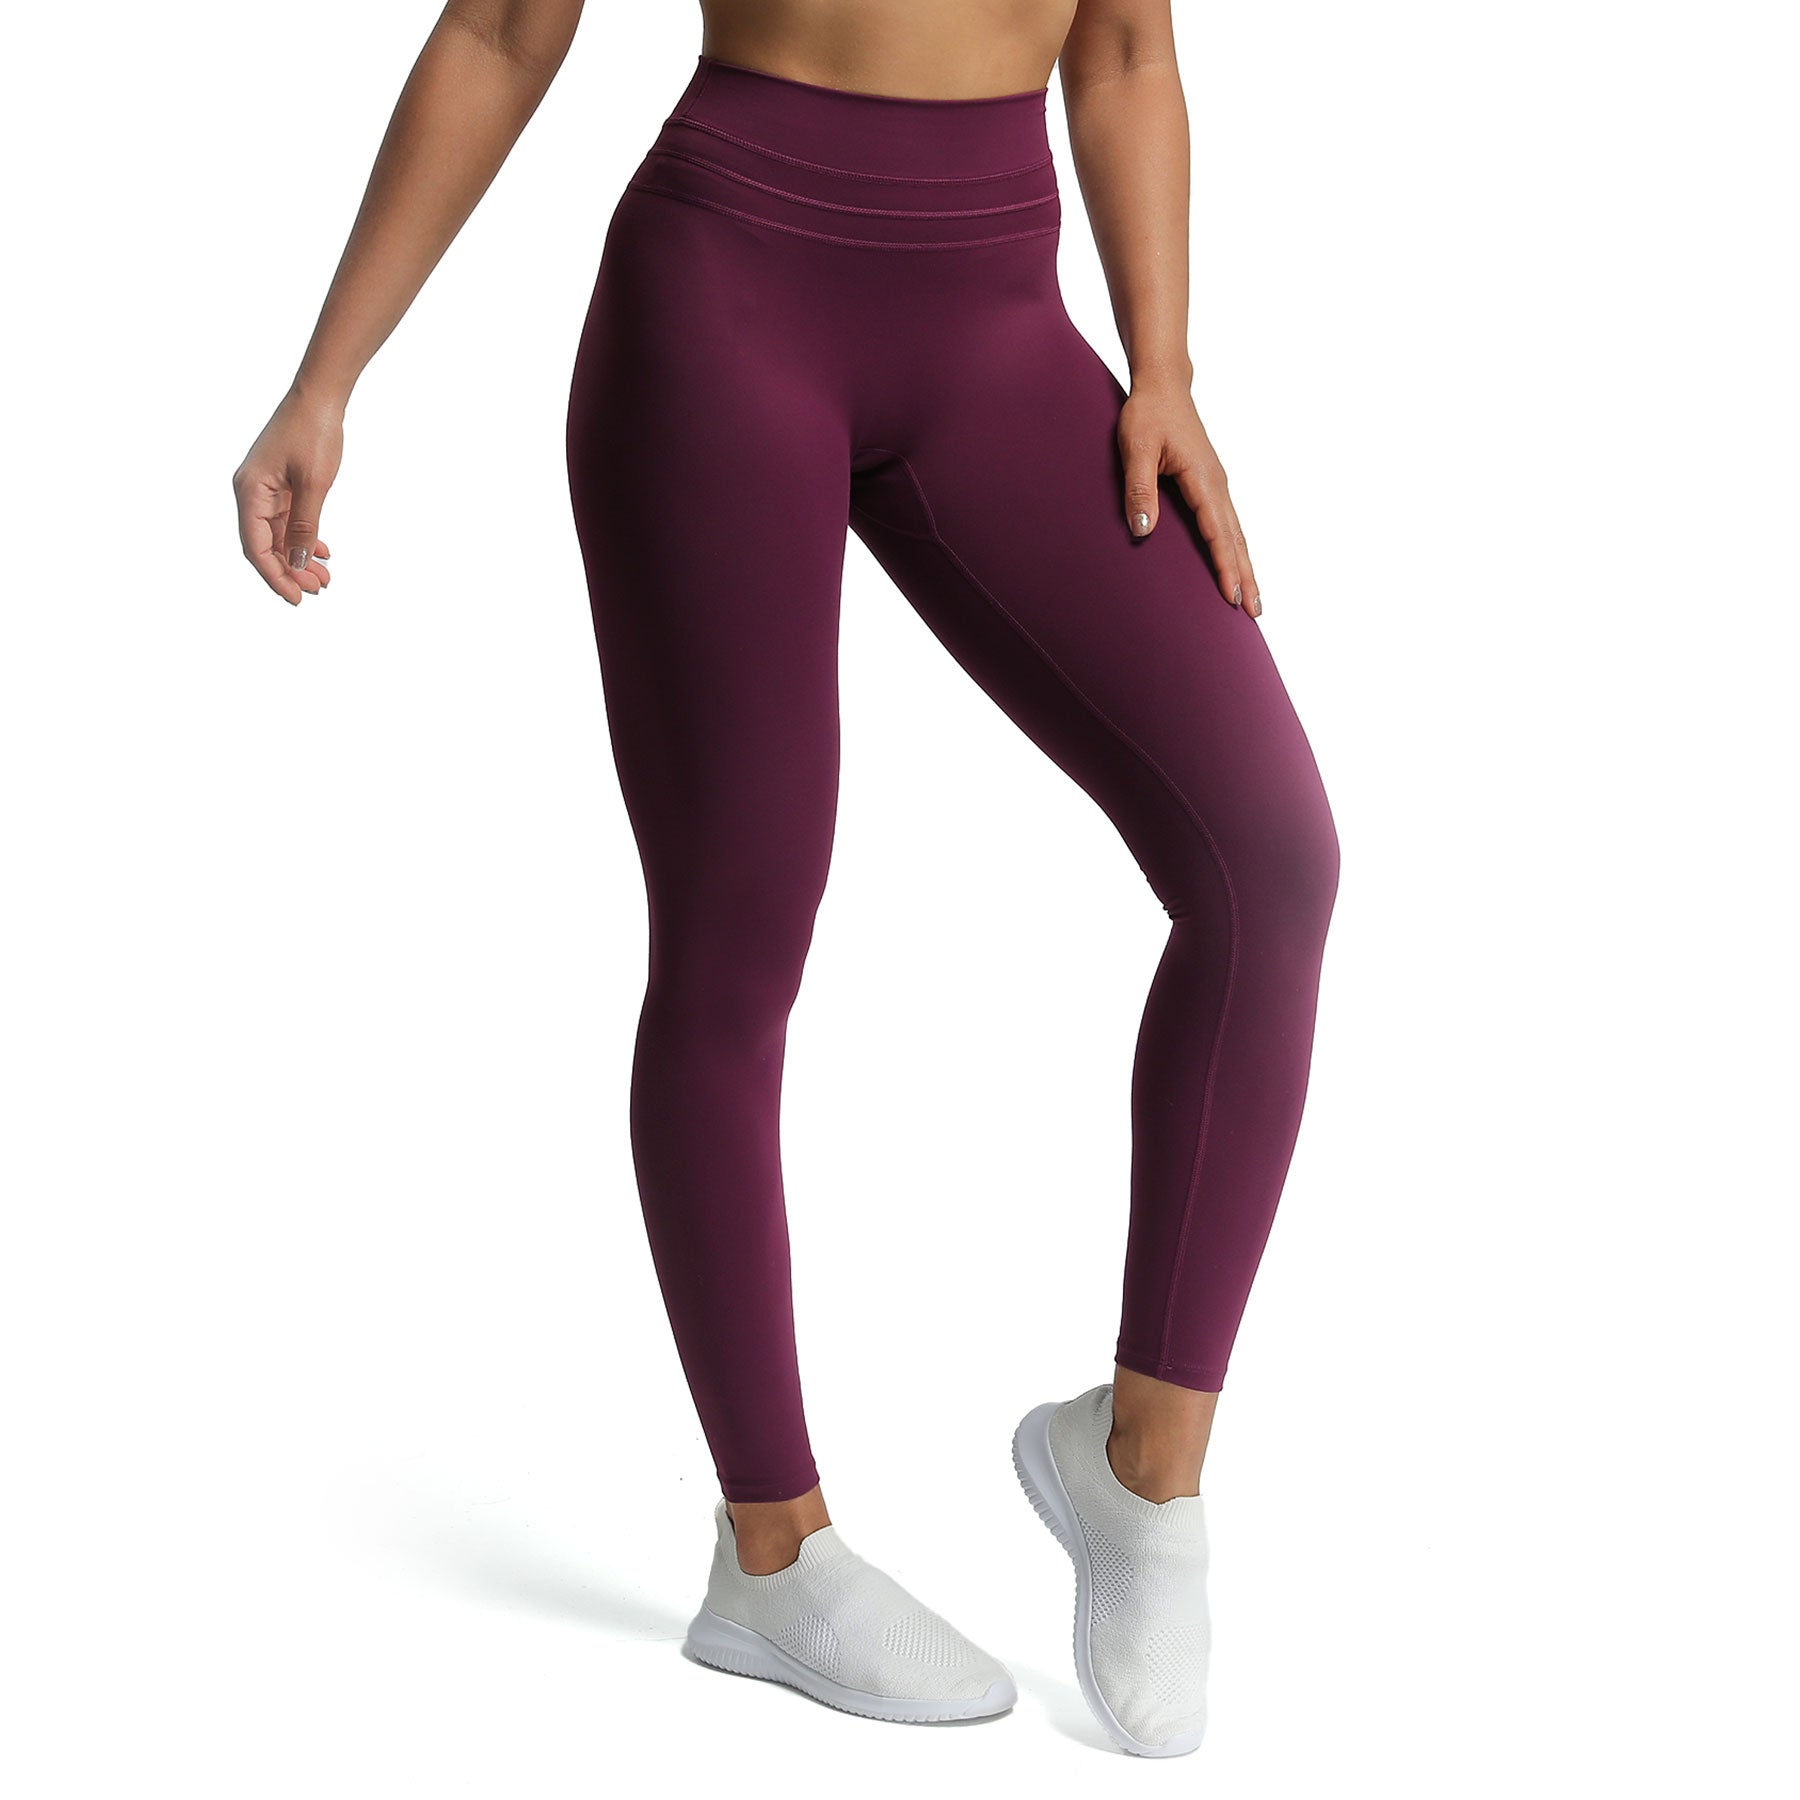  Aoxjox High Waisted Workout Leggings For Women Scrunch Tummy  Control Luna Buttery Soft Yoga Pants 27